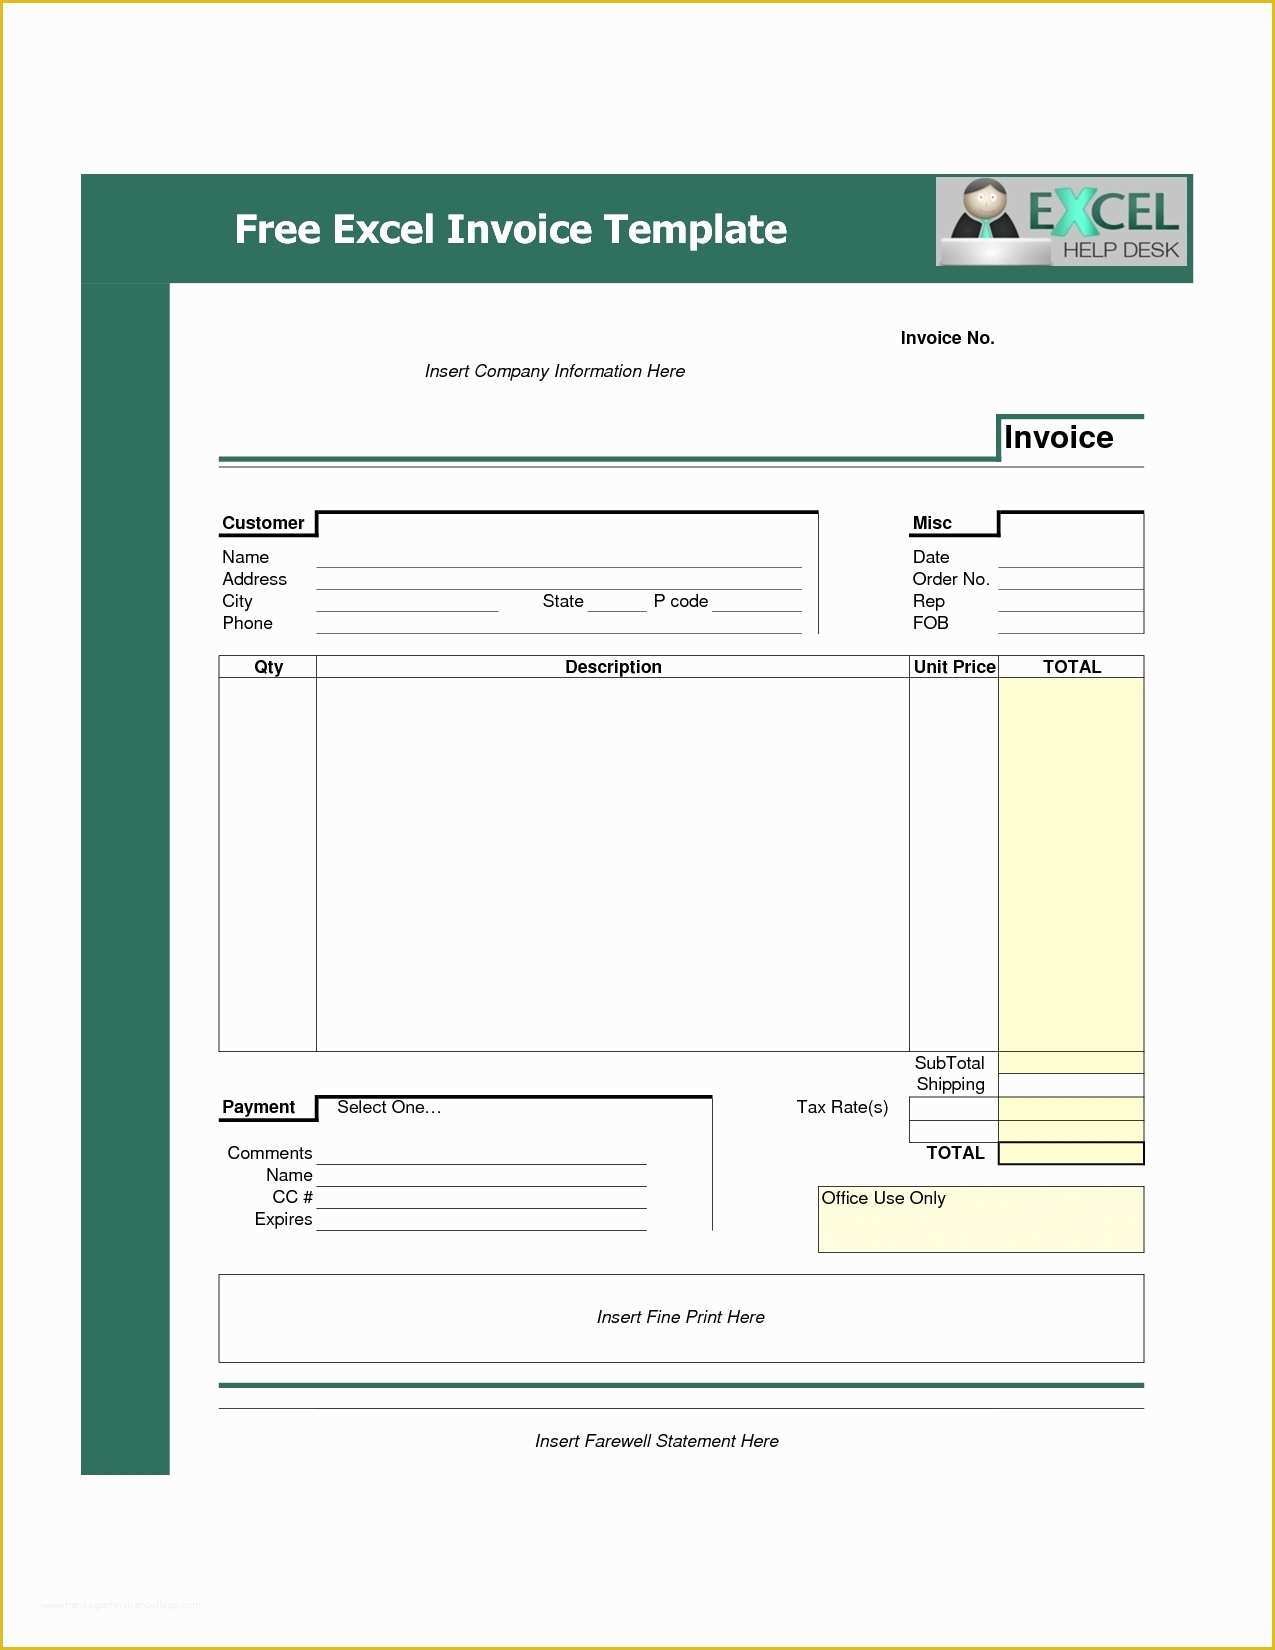 Commercial Invoice Template Excel Free Download Of Invoice Template Free Download Excel Invoice Template Ideas